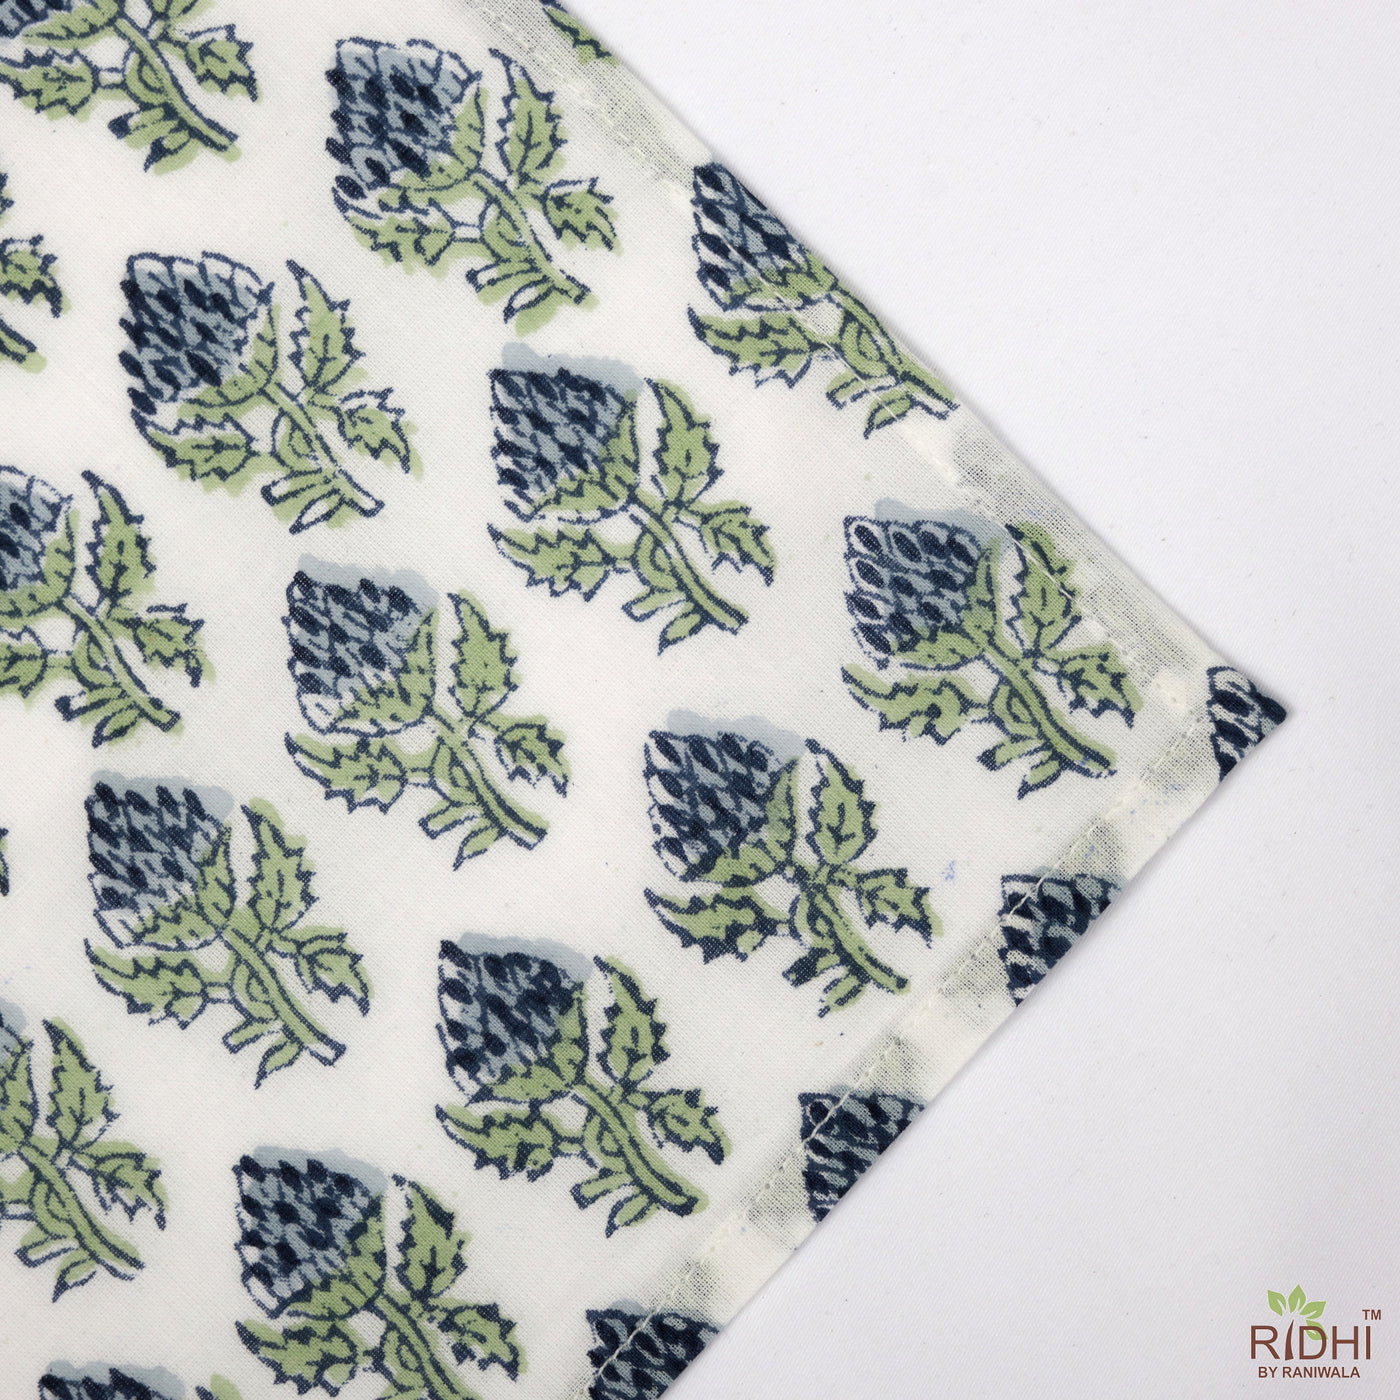 Airforce Blue, Fern Green Indian Hand Block Floral Printed Cotton Cloth Napkins, Face Covers, 18x18"- Cocktail Napkins, 20x20"- Dinner Napkins